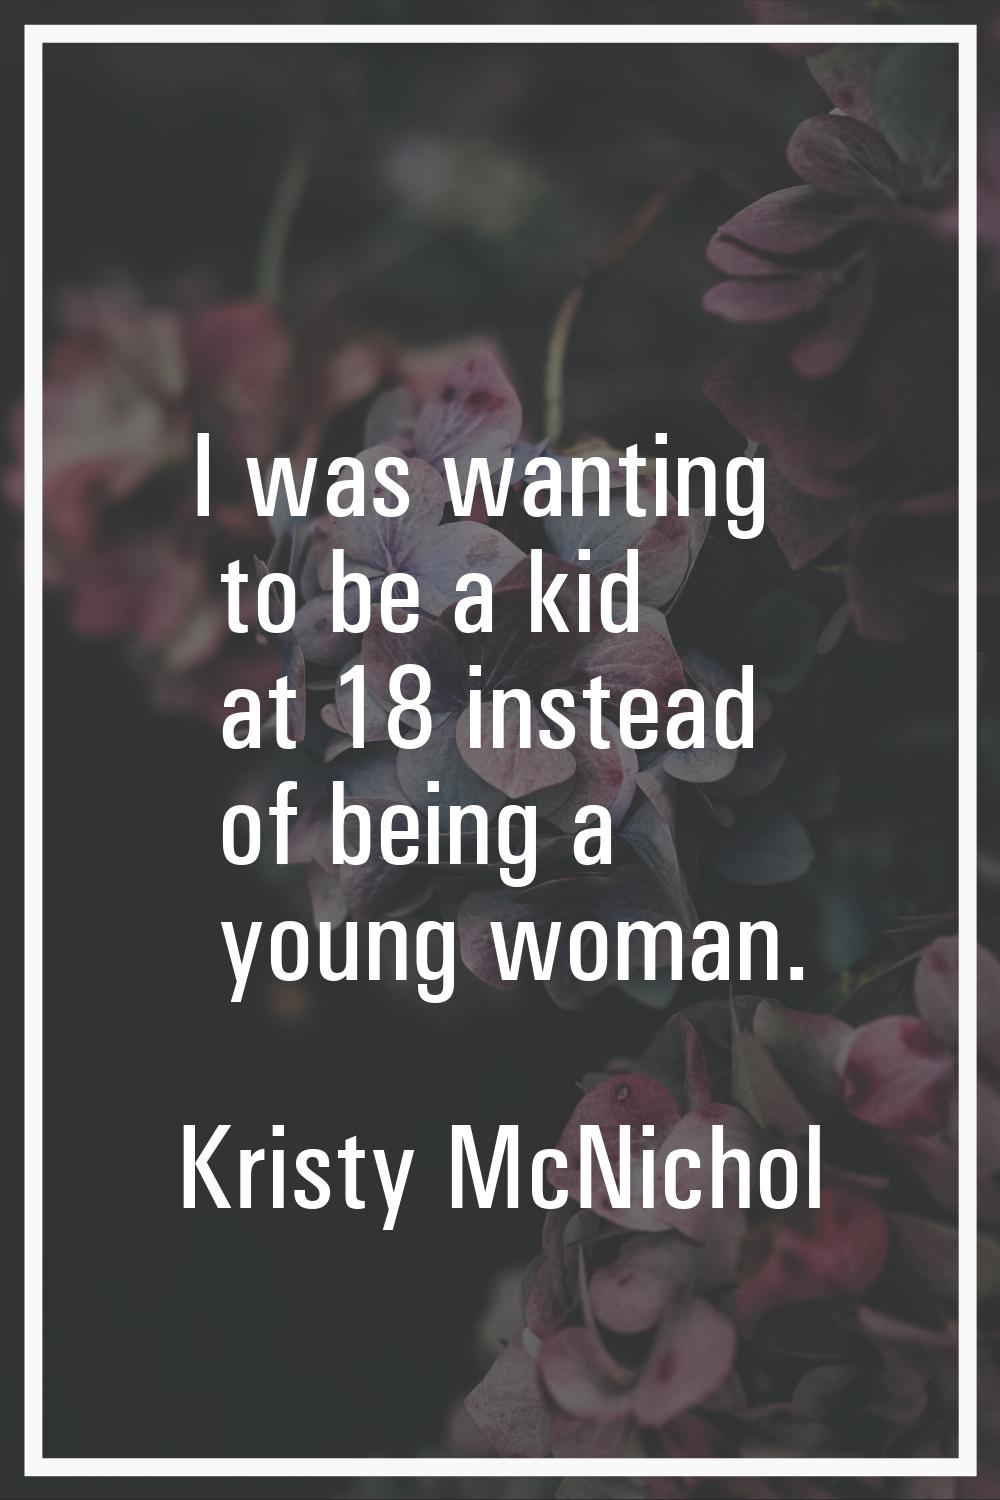 I was wanting to be a kid at 18 instead of being a young woman.